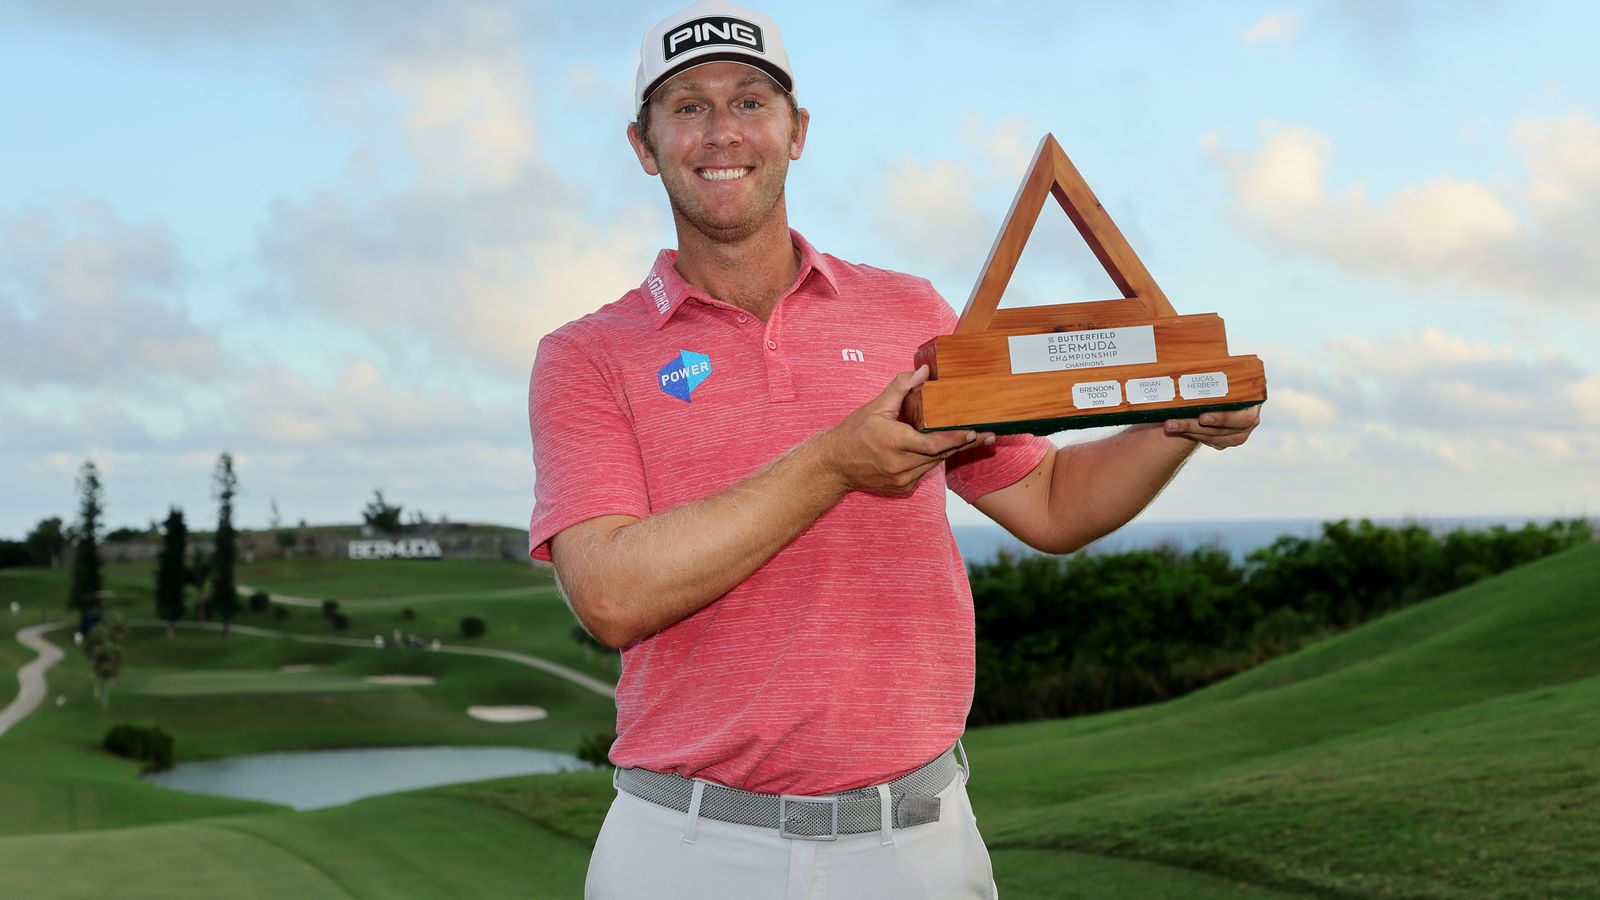 bermuda-championship-winner-seamus-power-wants-to-represent-europe-at-the-ryder-cup-in-rome-next-september